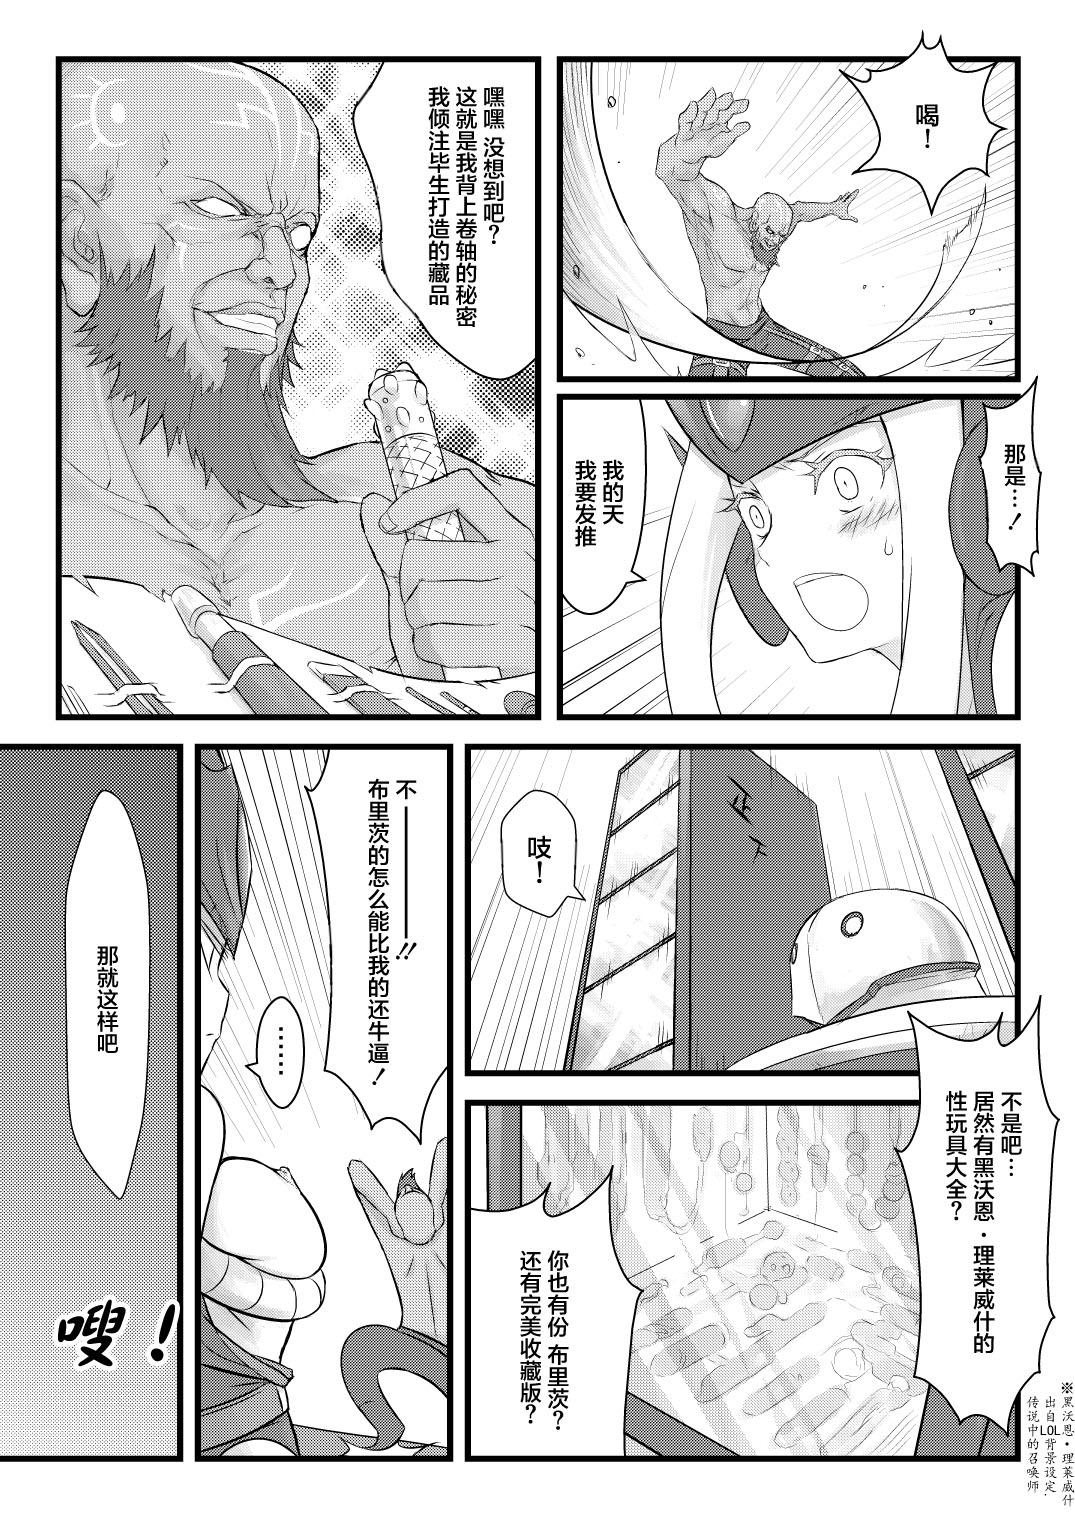 Vaginal ININ Renmei - League of legends Asia - Page 11